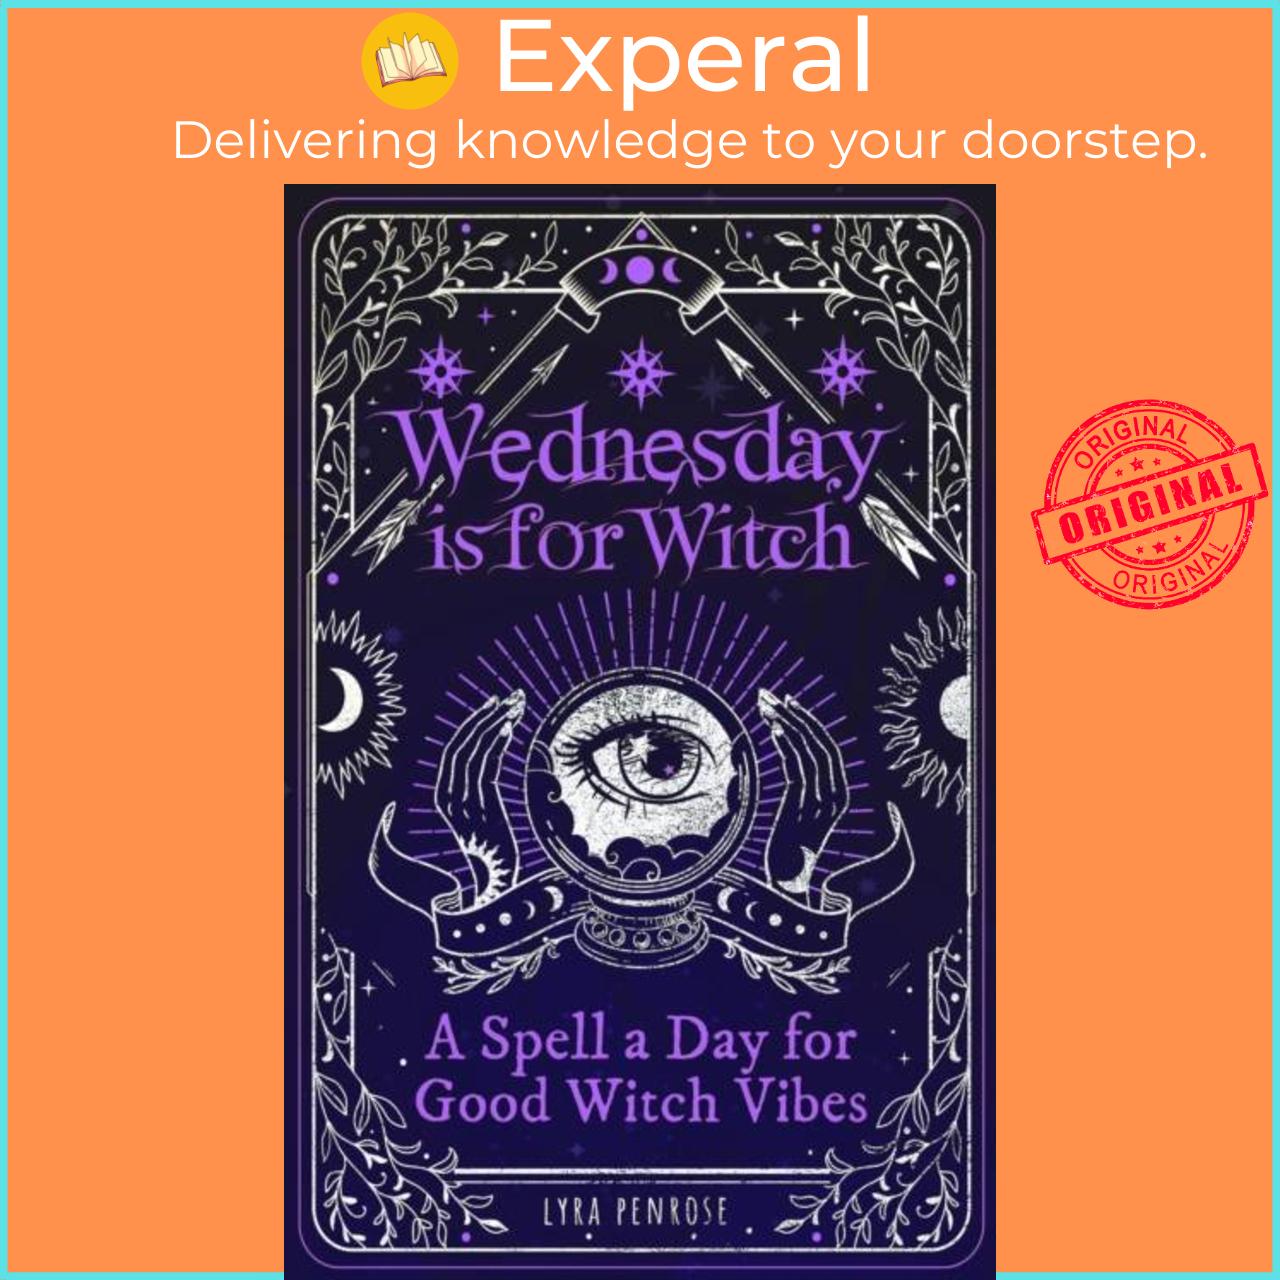 Sách - Wednesday is for Witch - A Spell a Day for Good Witch Vibes by Lyra Penrose (UK edition, paperback)